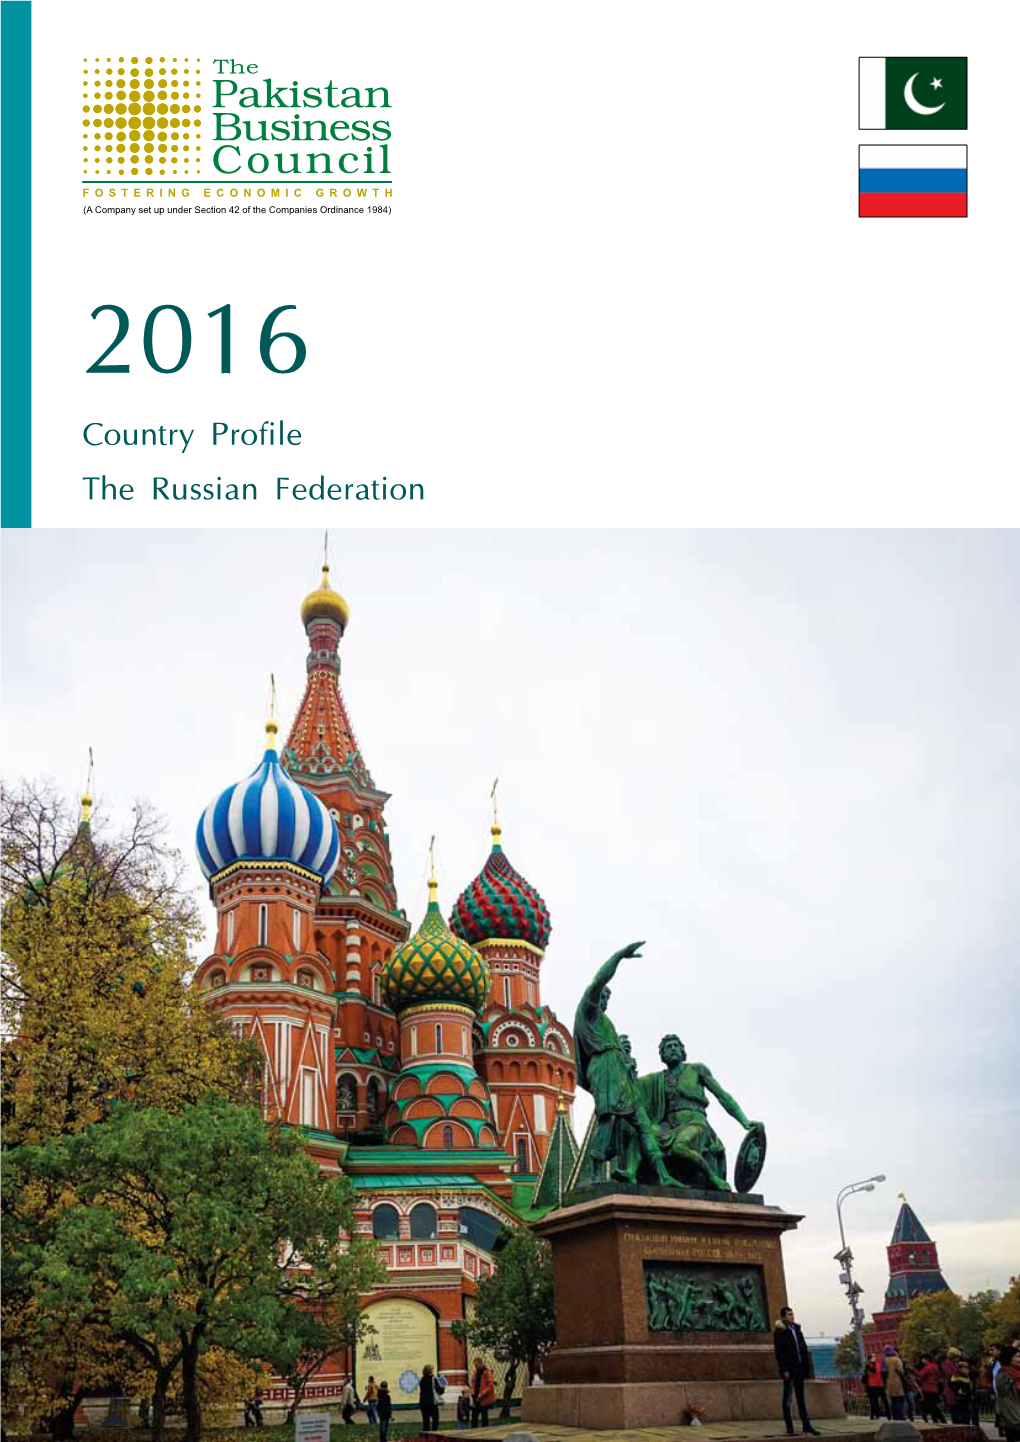 The Russian Federation Country Profile